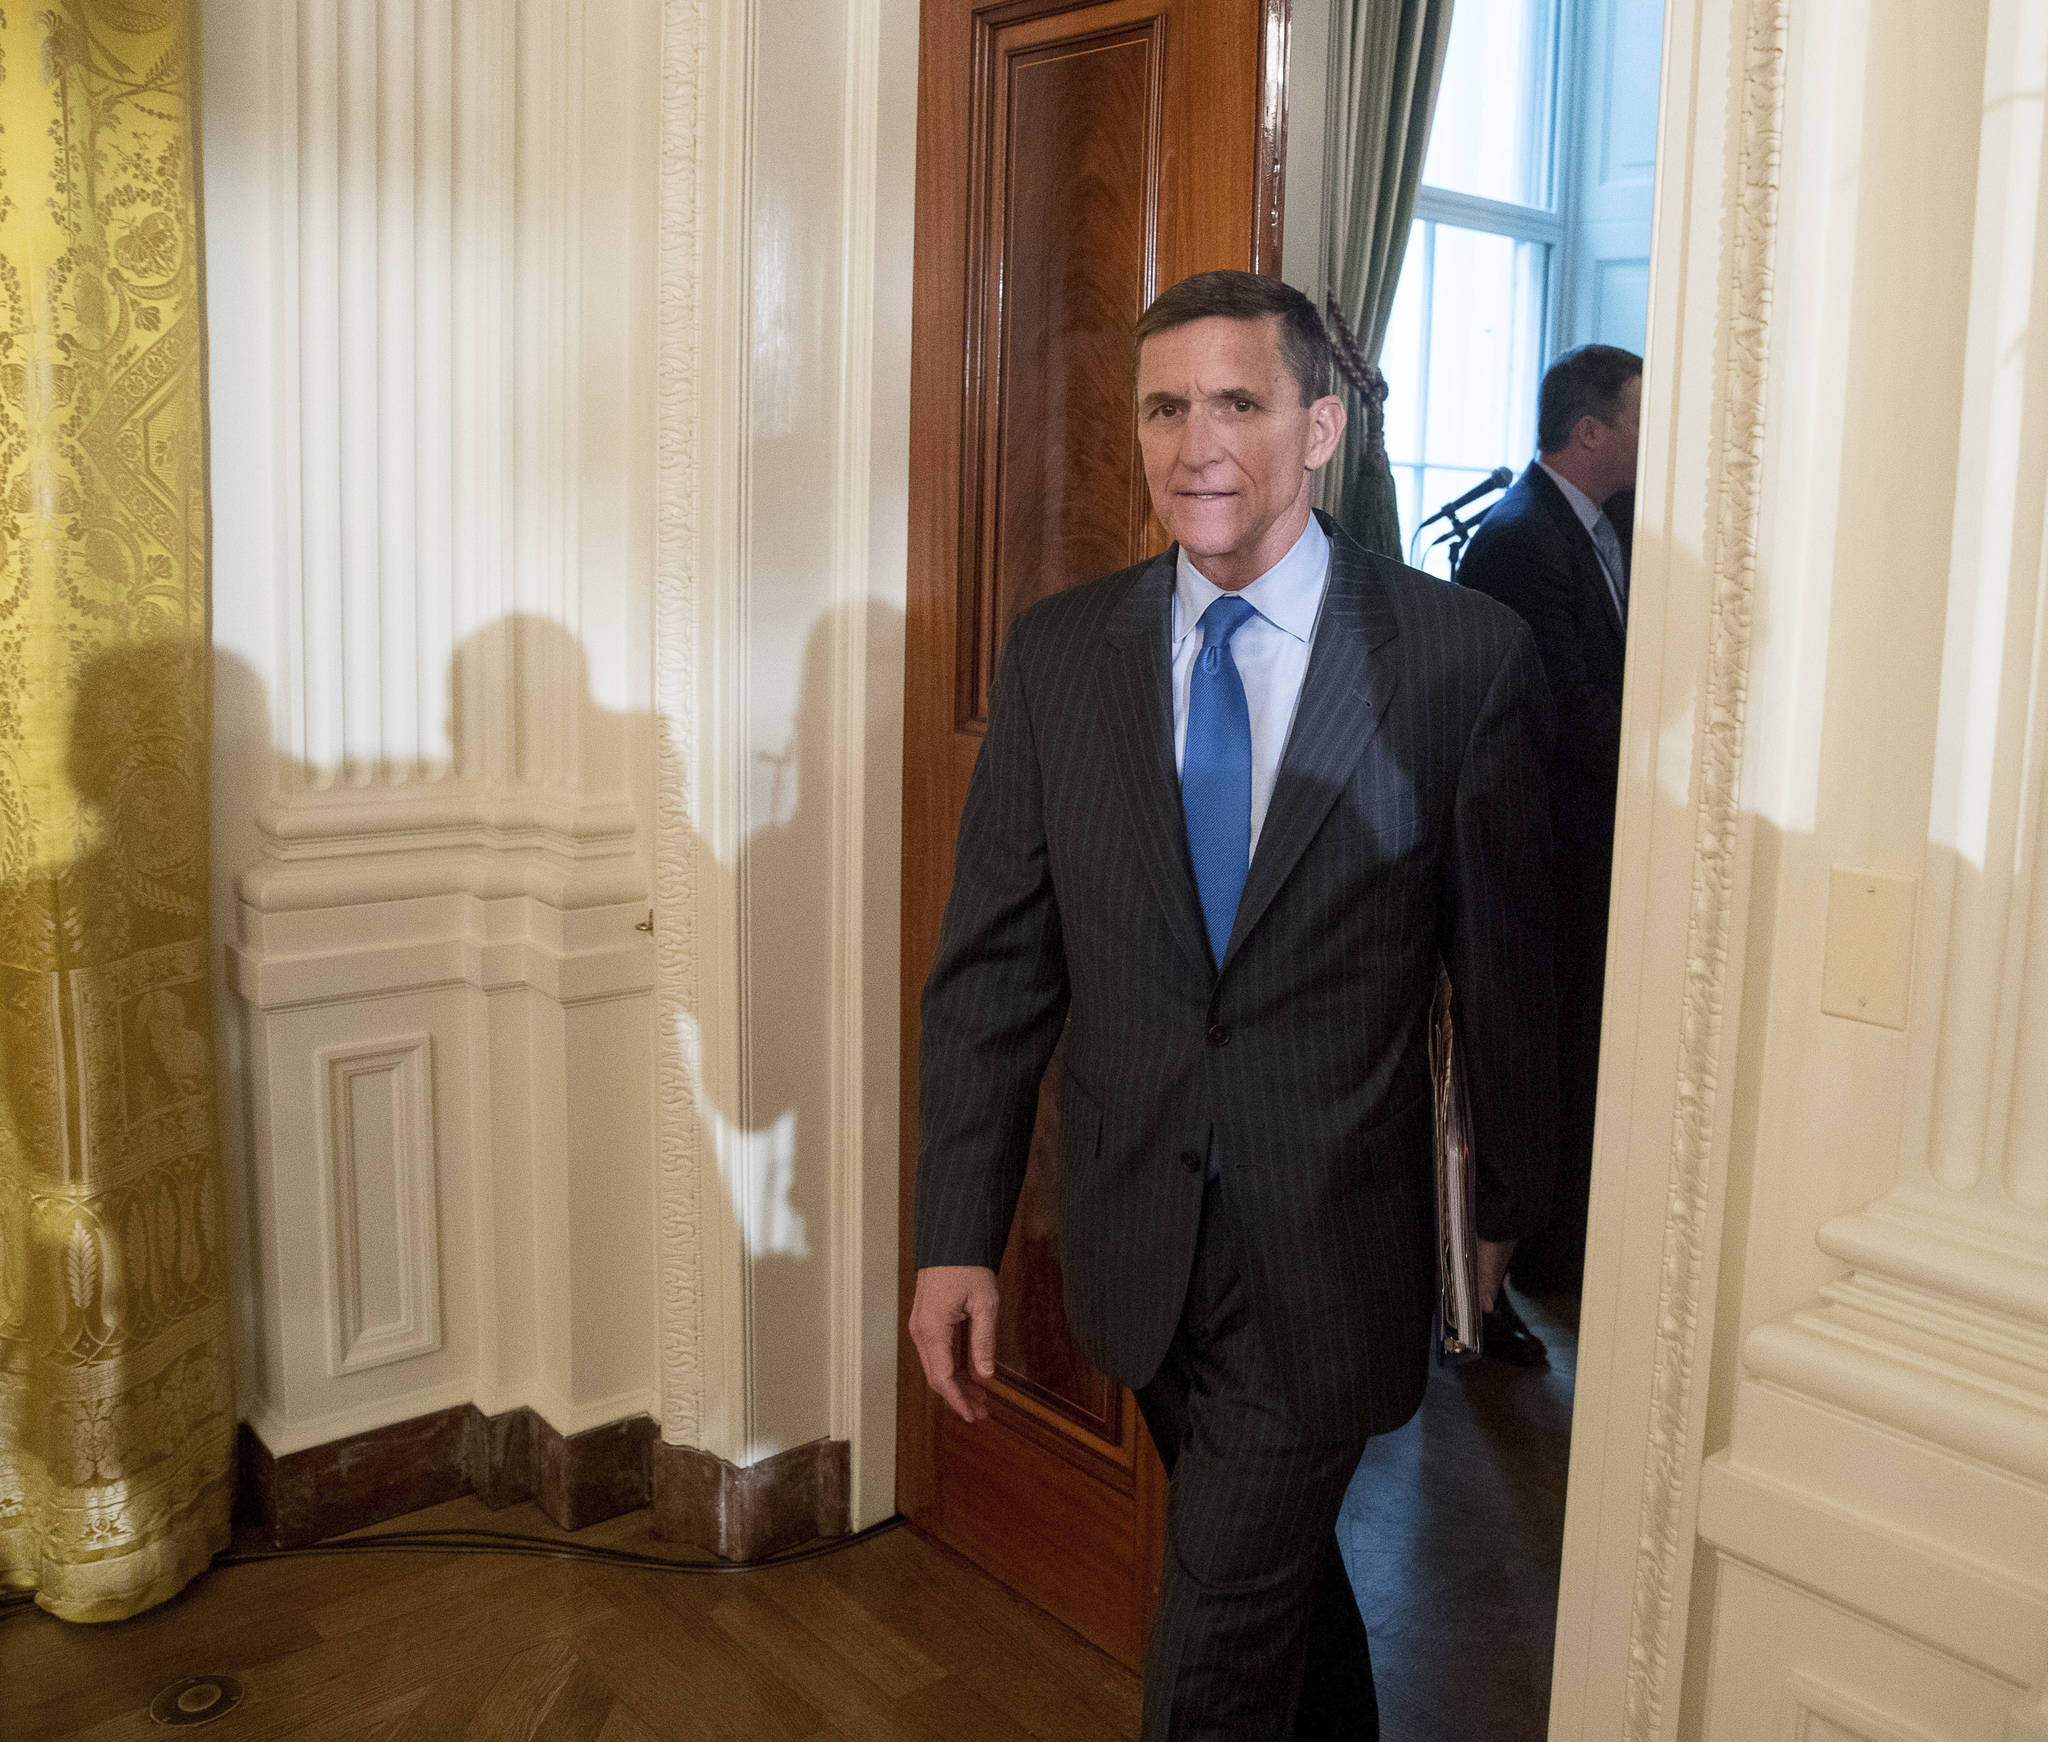 In this Jan. 22, 2017 file photo, National Security Adviser Michael Flynn arrives for a White House senior staff swearing in ceremony in the East Room of the White House, in Washington. President Donald Trump’s former national security adviser has provided so much information to the special counsel’s Russia investigation that prosecutors say he shouldn’t do any prison time, according to a court filing Tuesday, Dec. 4, 2018, that describes Flynn’s cooperation as “substantial.” (AP Photo/Andrew Harnik, File)